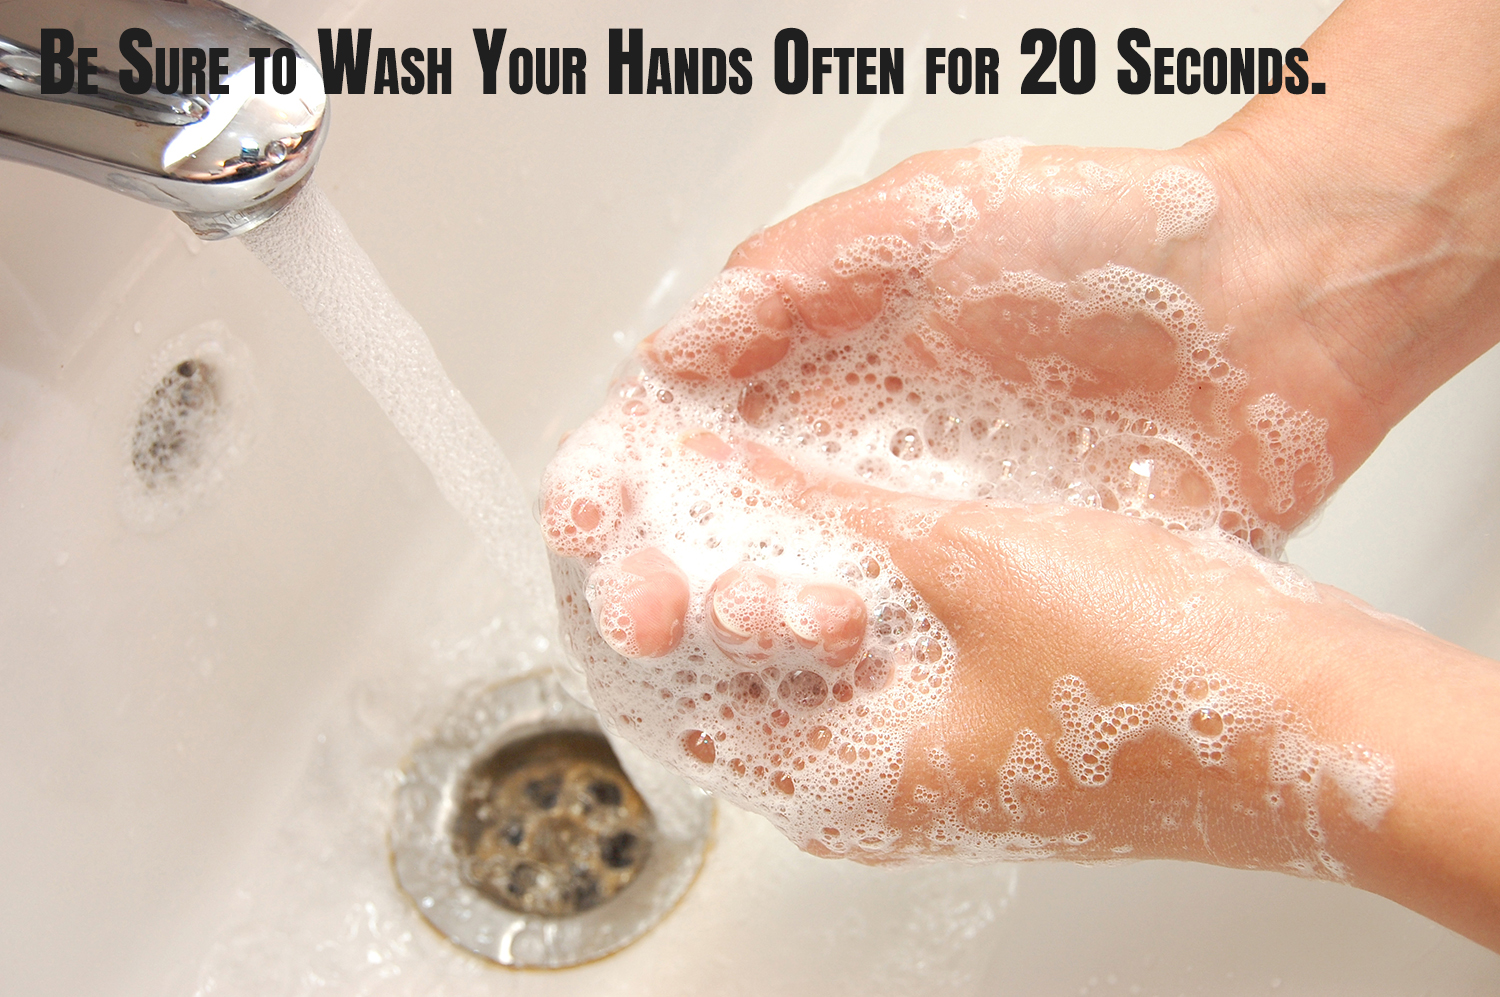 Wash Your Hands Frequently for 20 Seconds